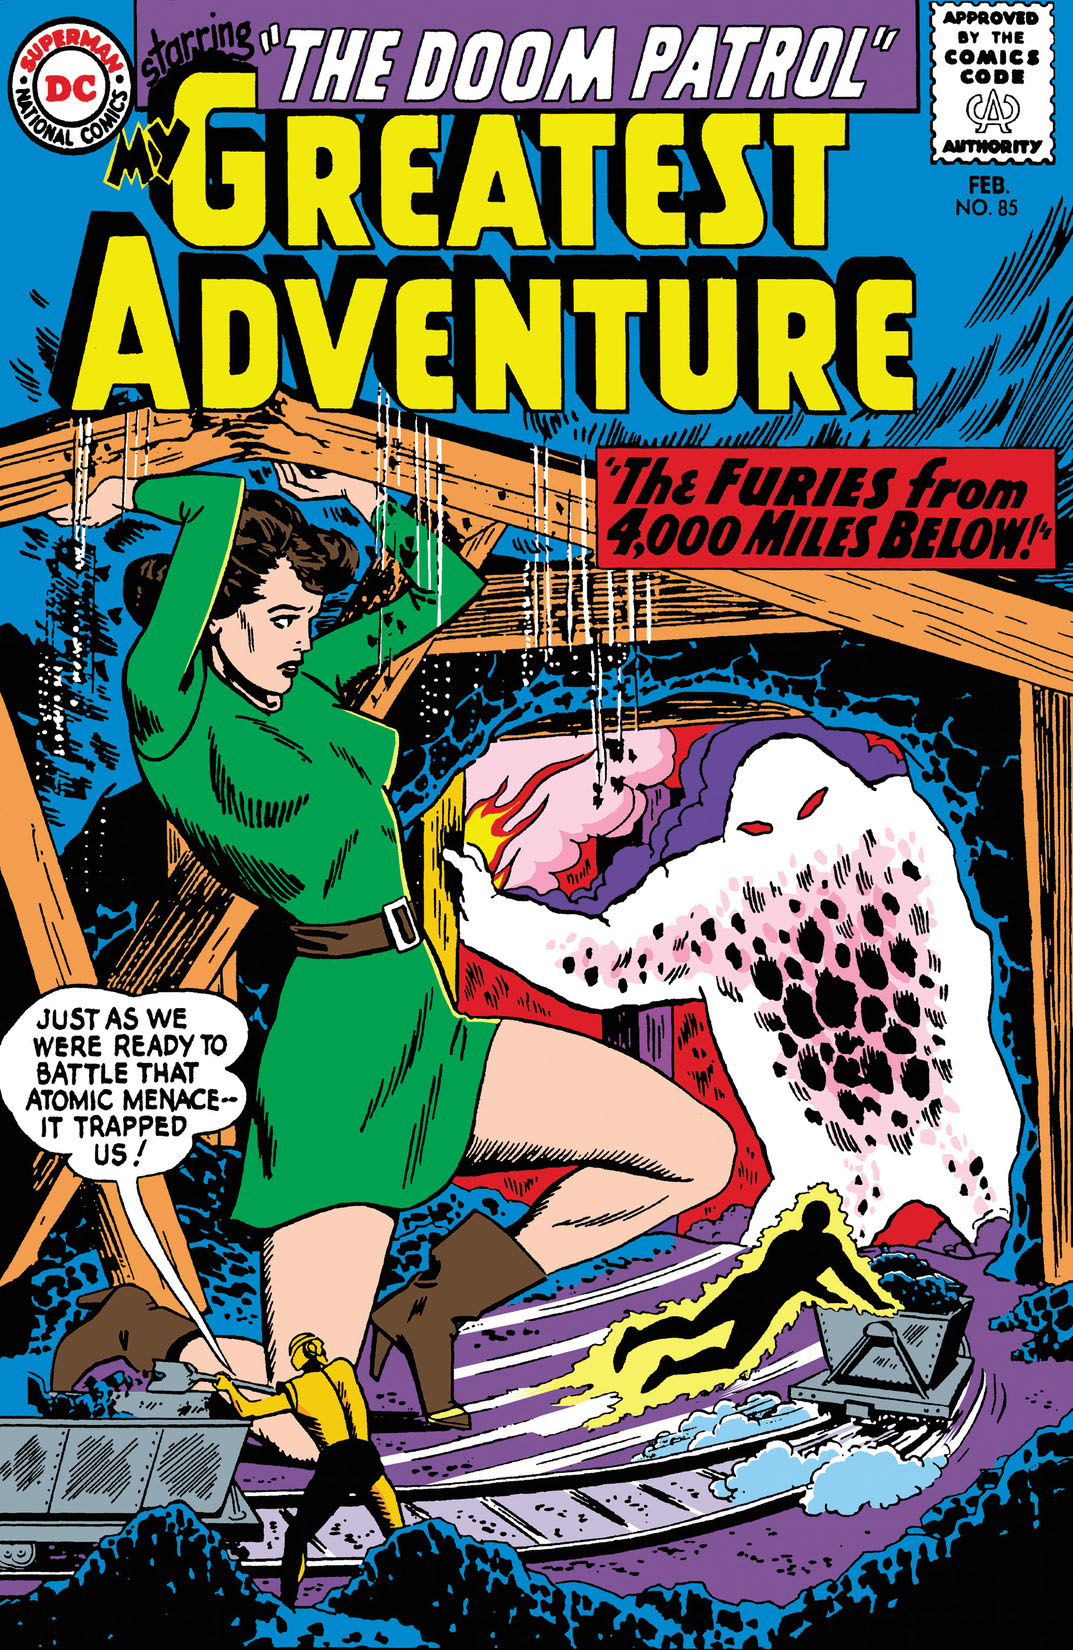 My Greatest Adventure (1955-) #85 preview images